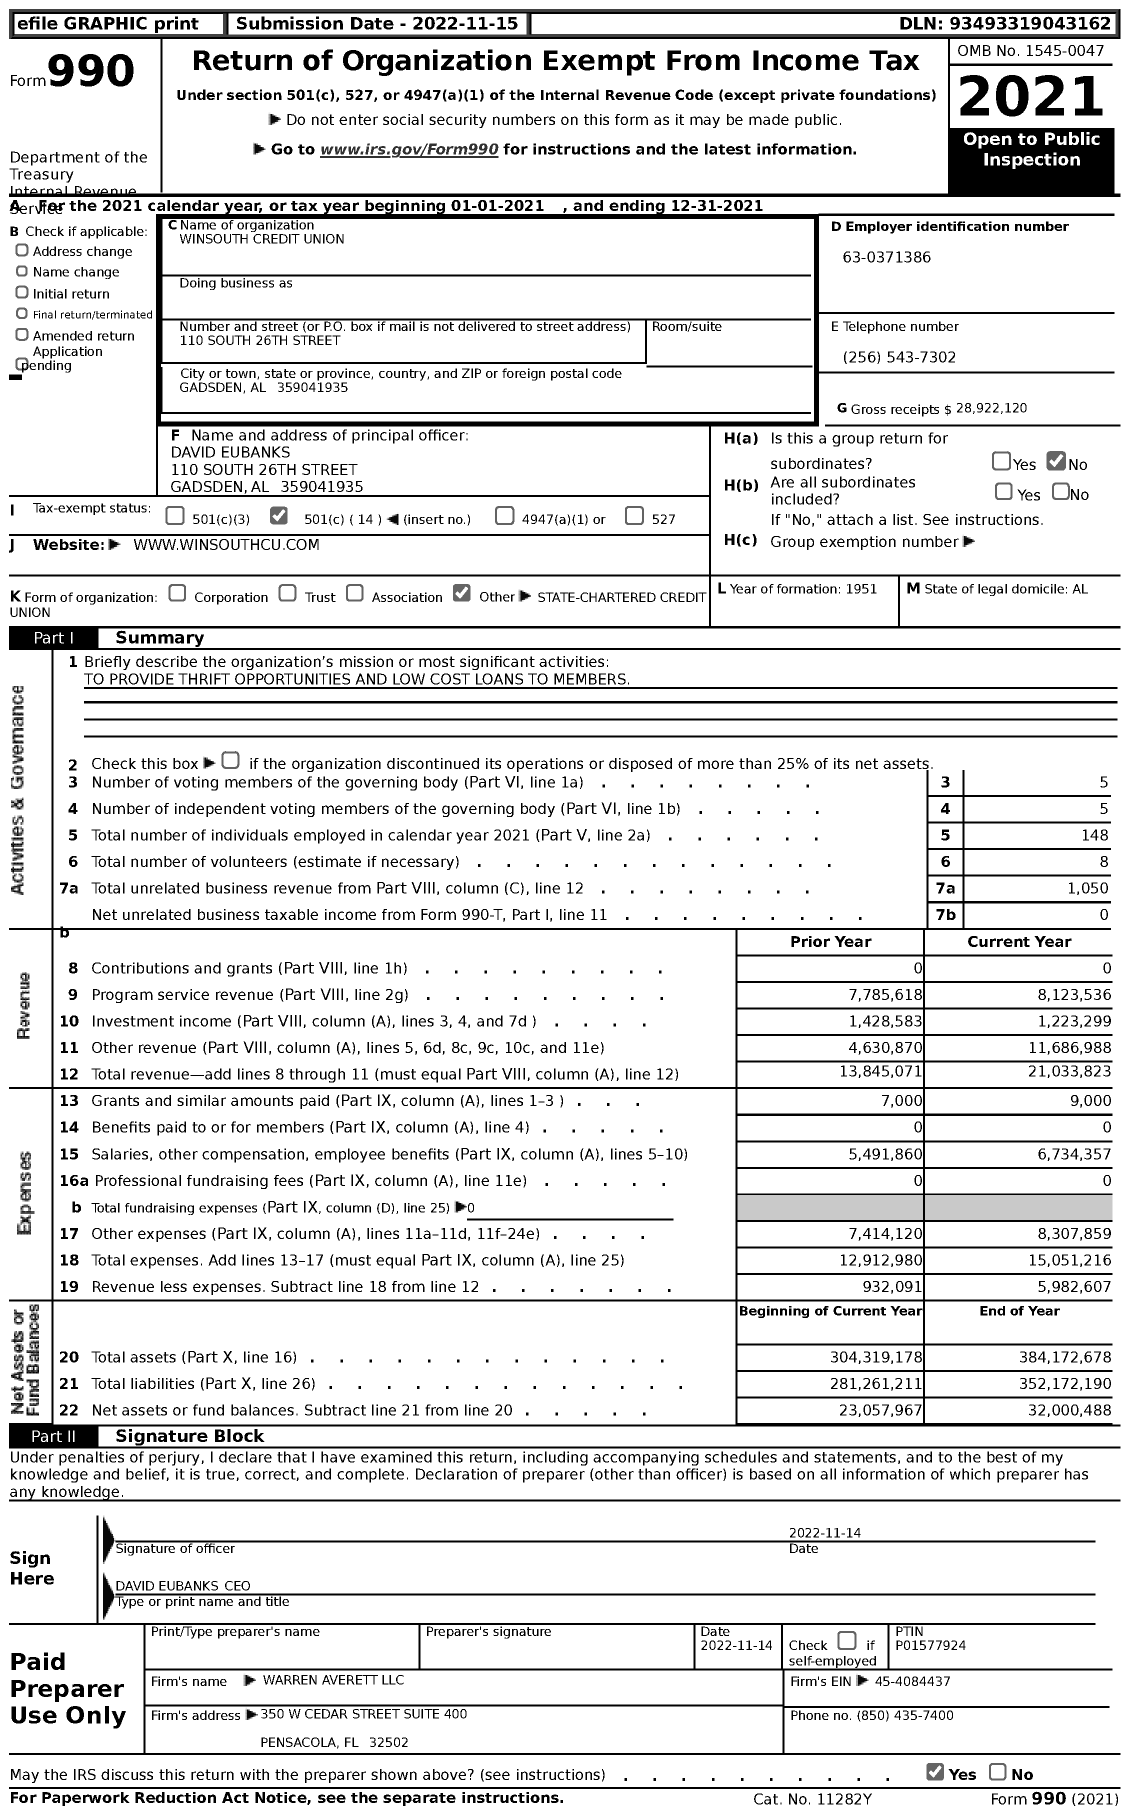 Image of first page of 2021 Form 990 for Winsouth Credit Union